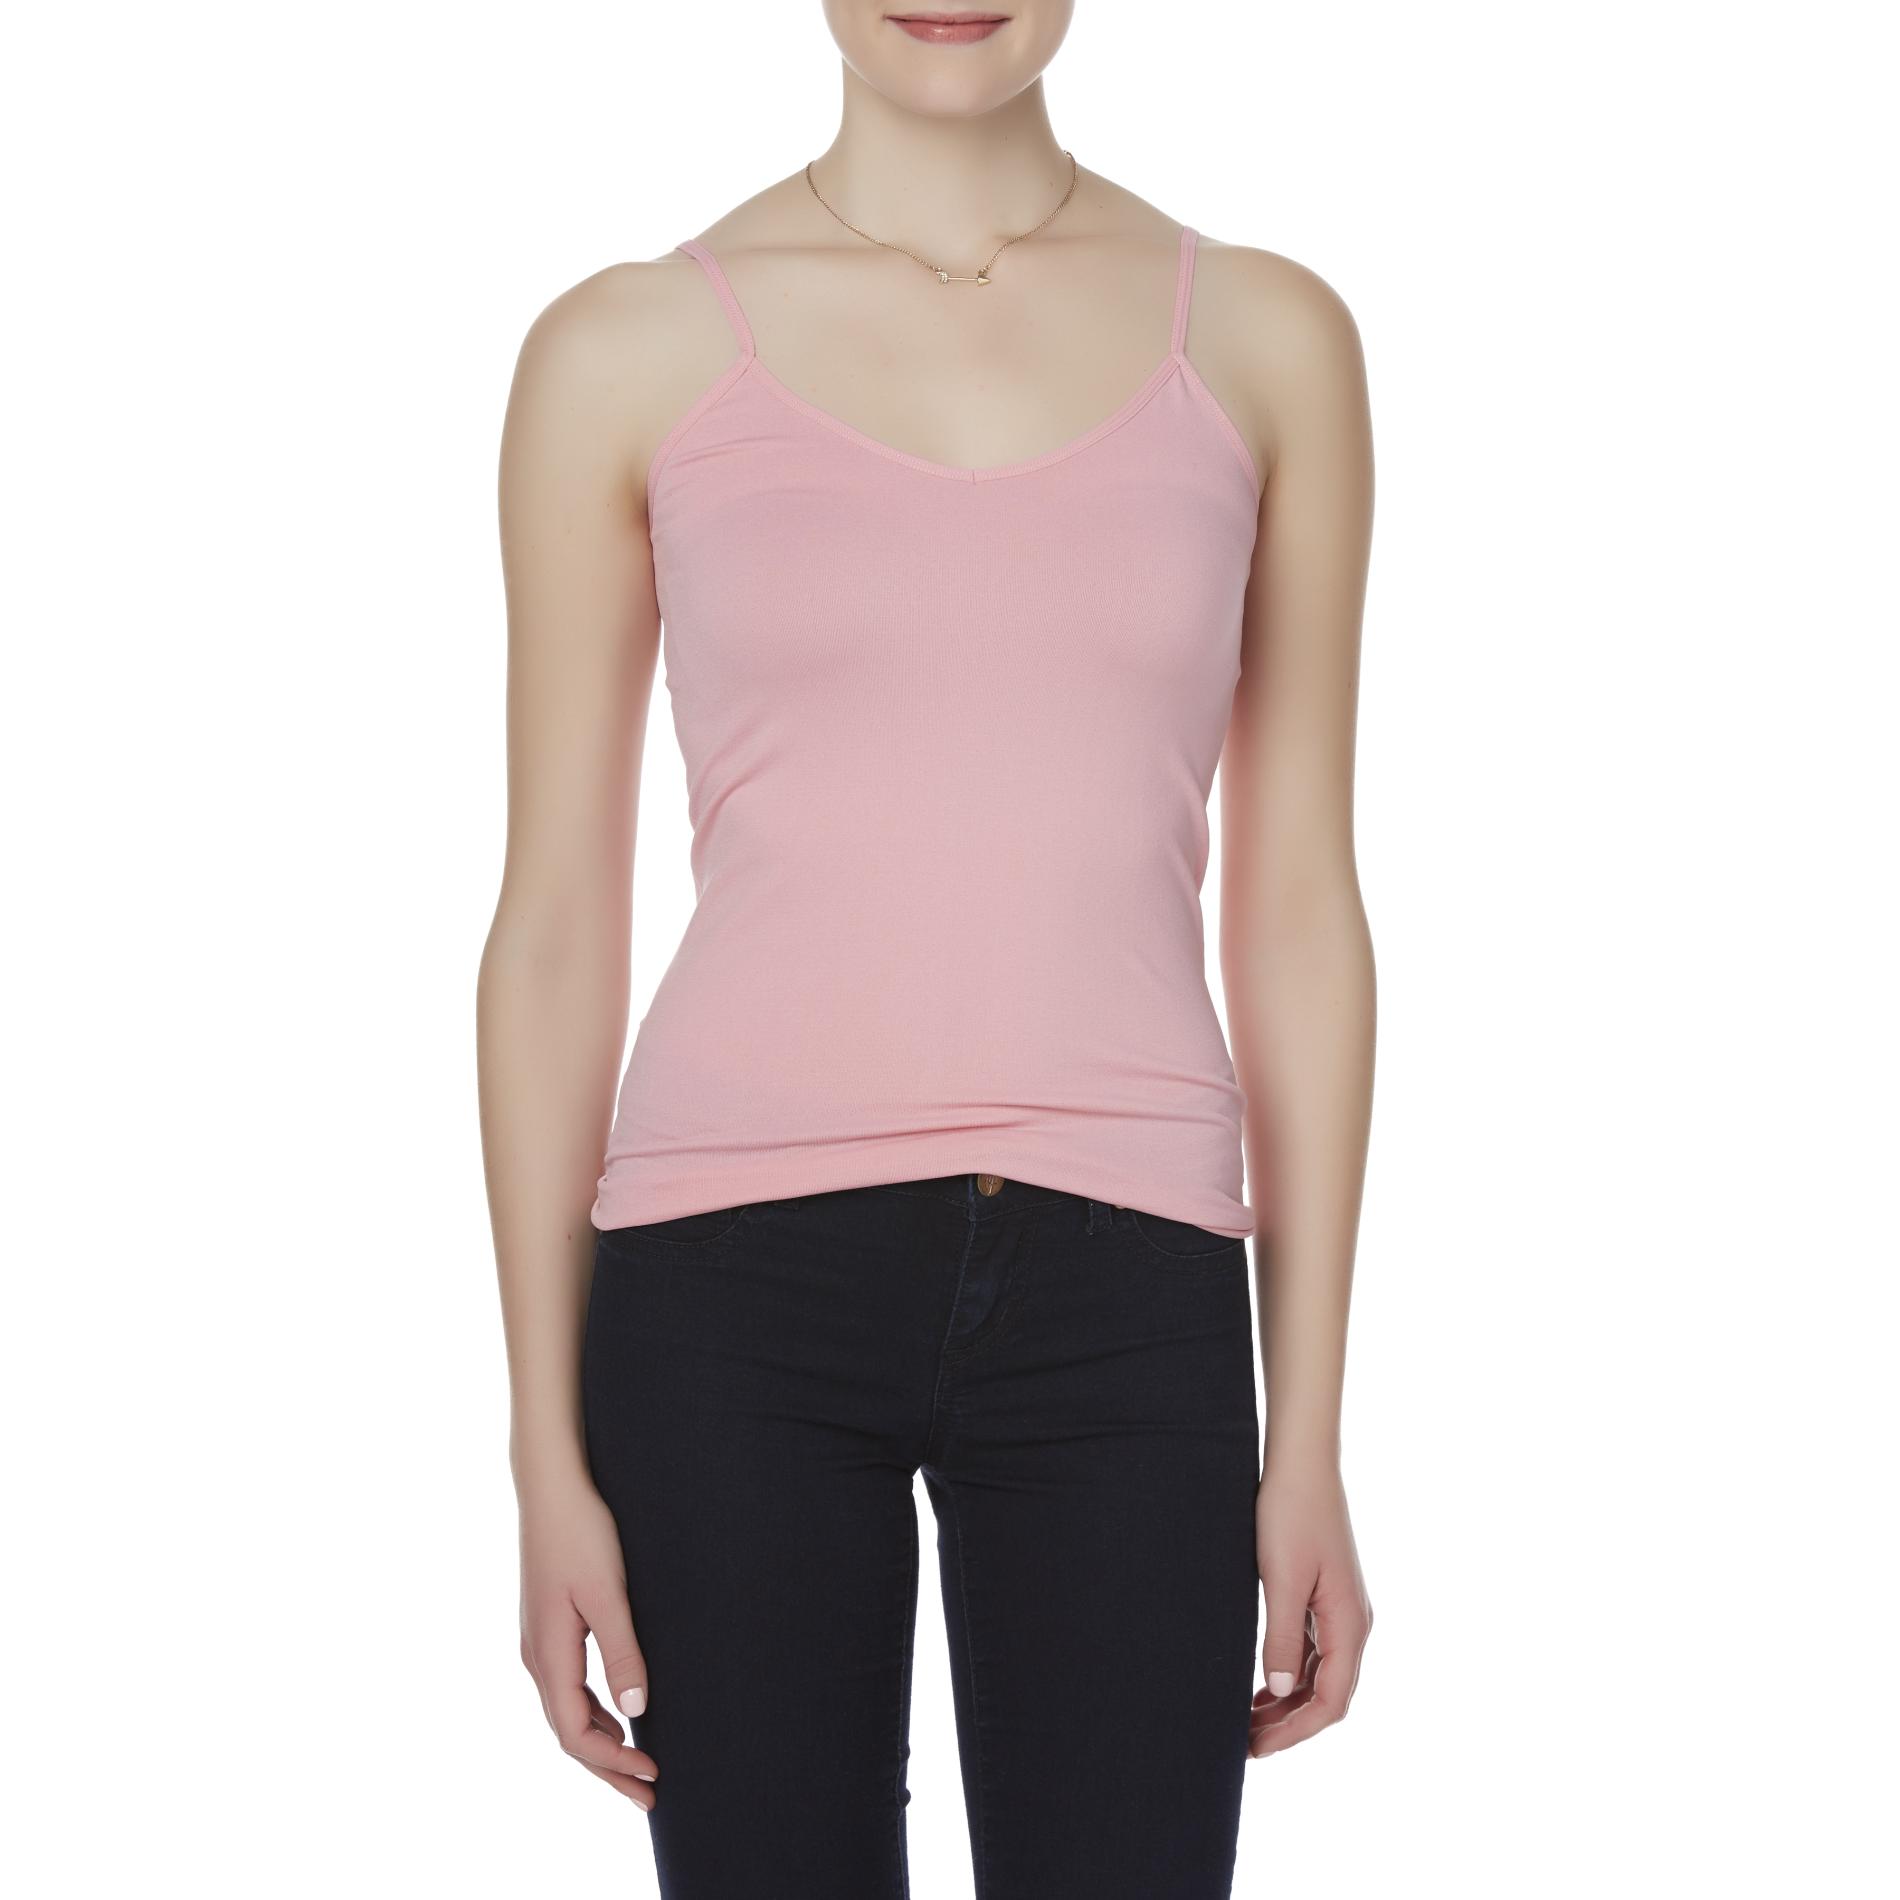 Simply Styled Women's Seamless Cami